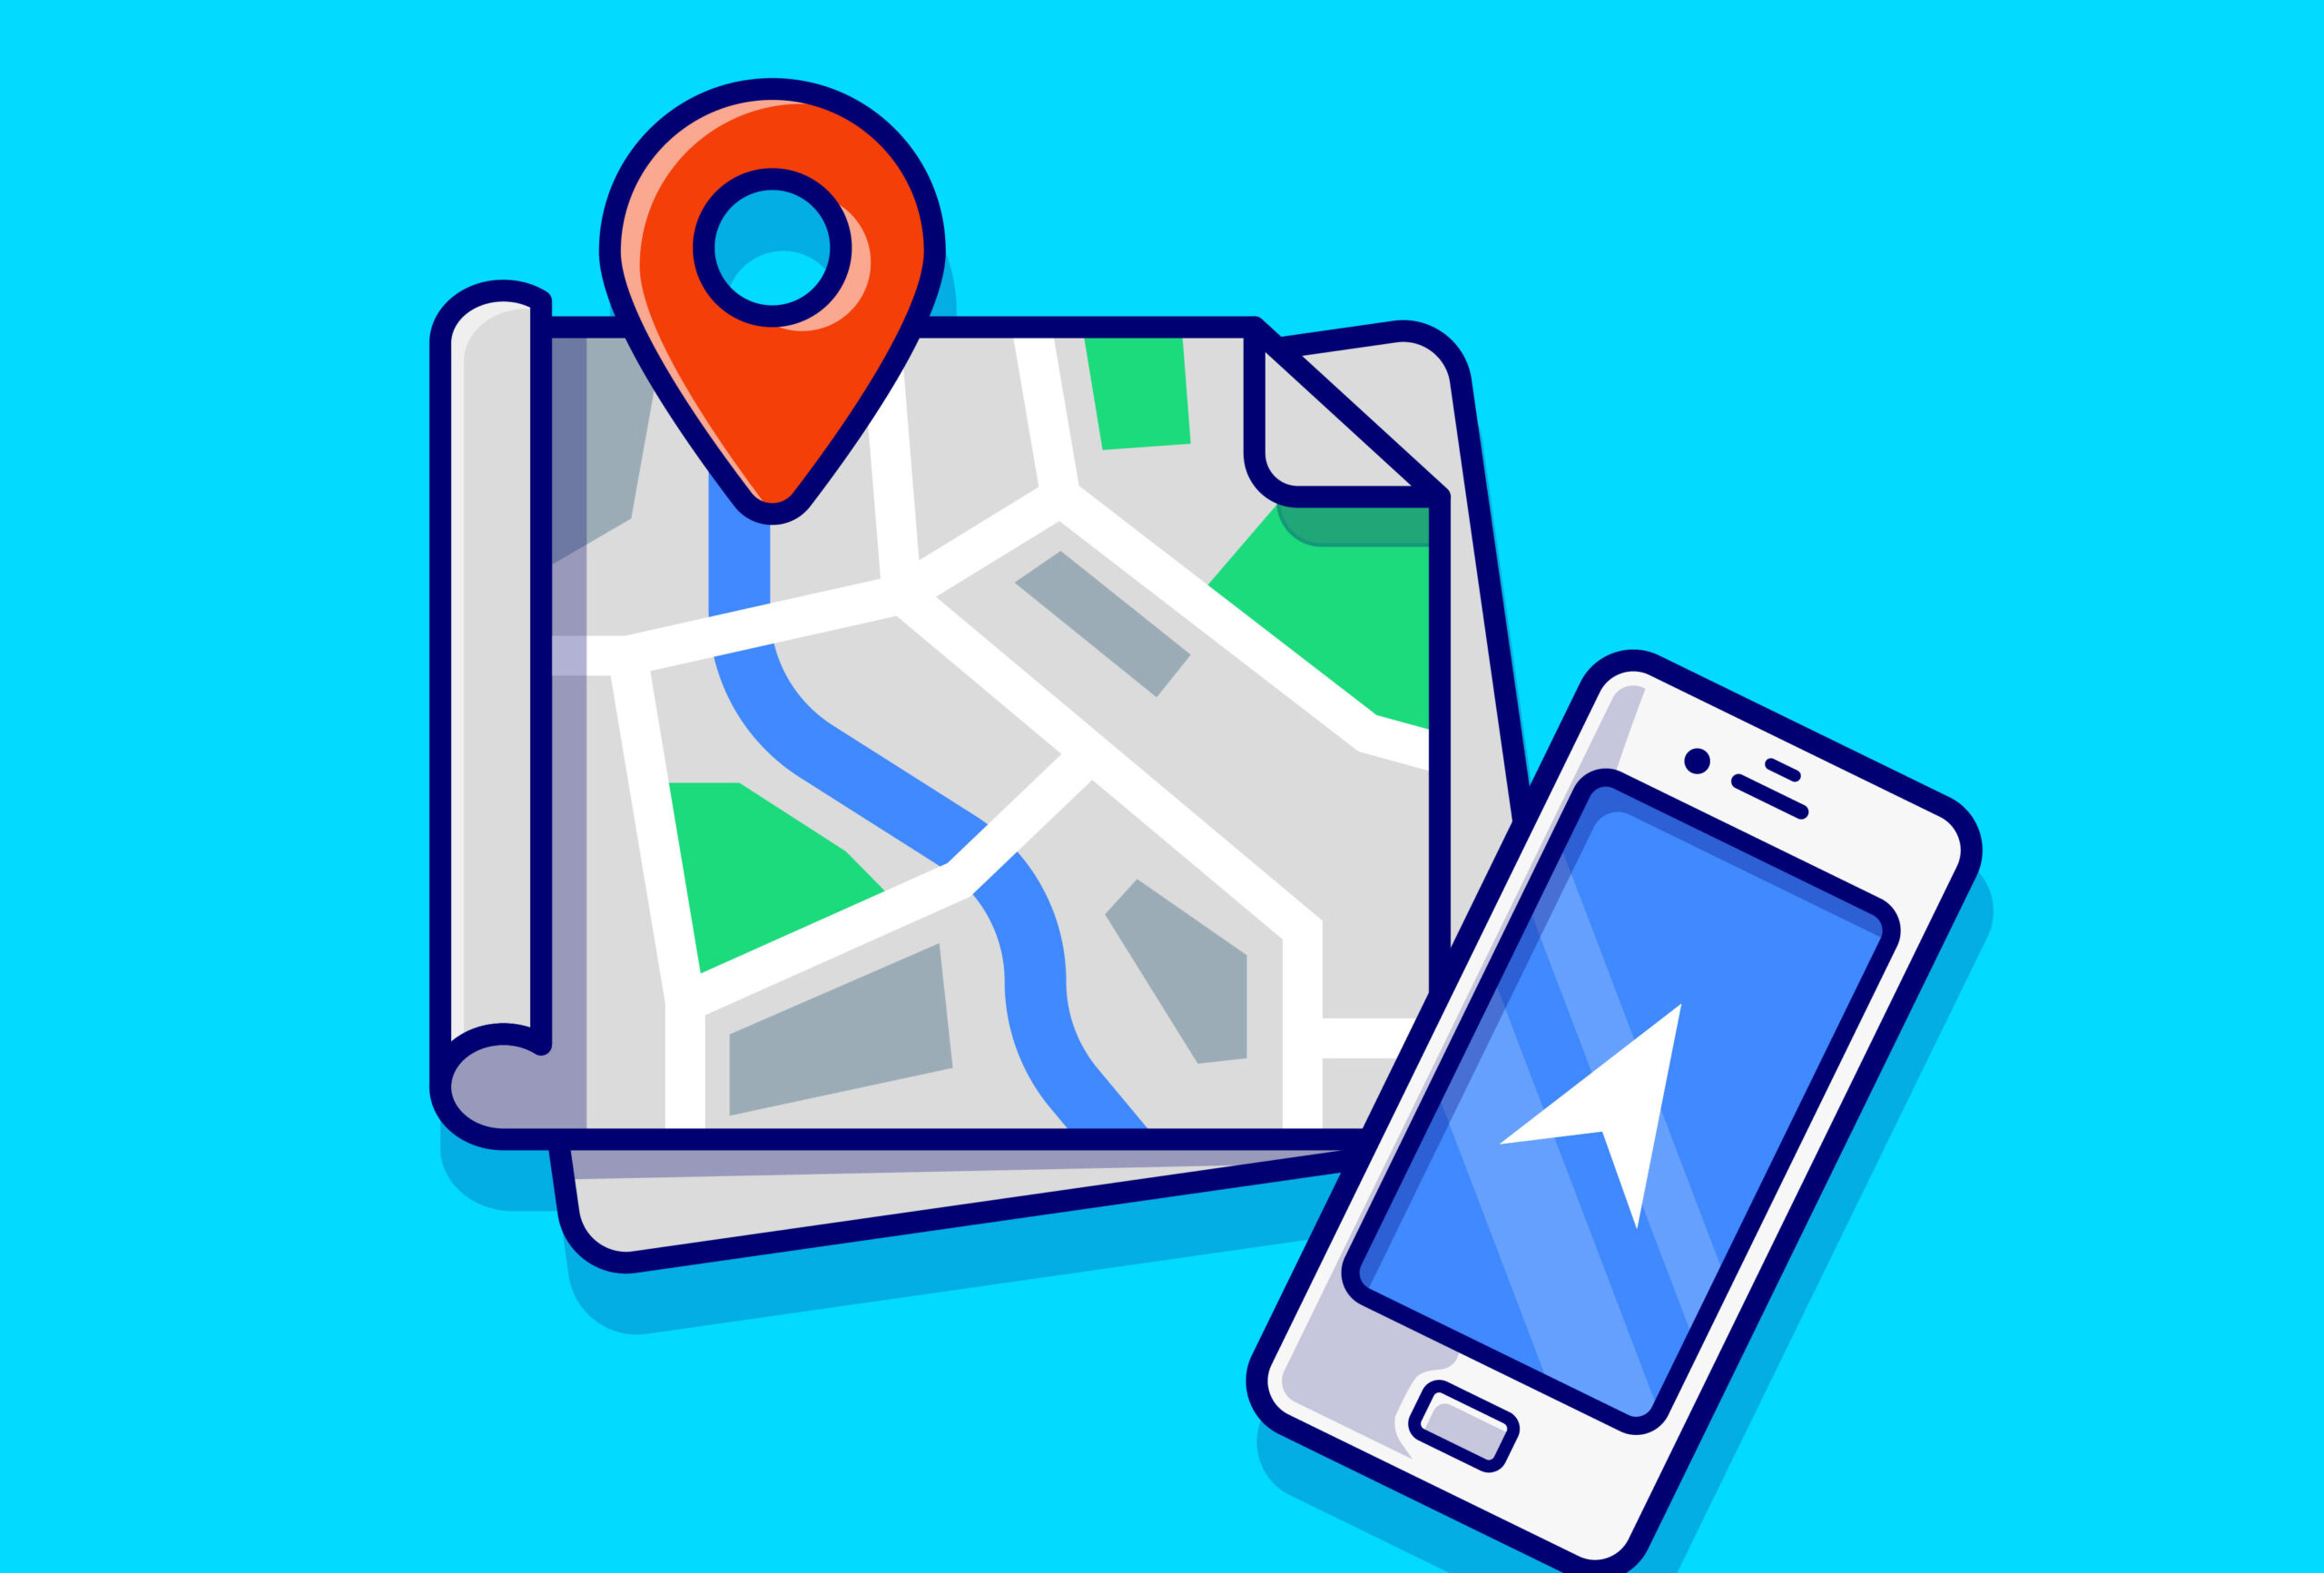 Hyperlocal Marketing: Reaching The Real Last Mile